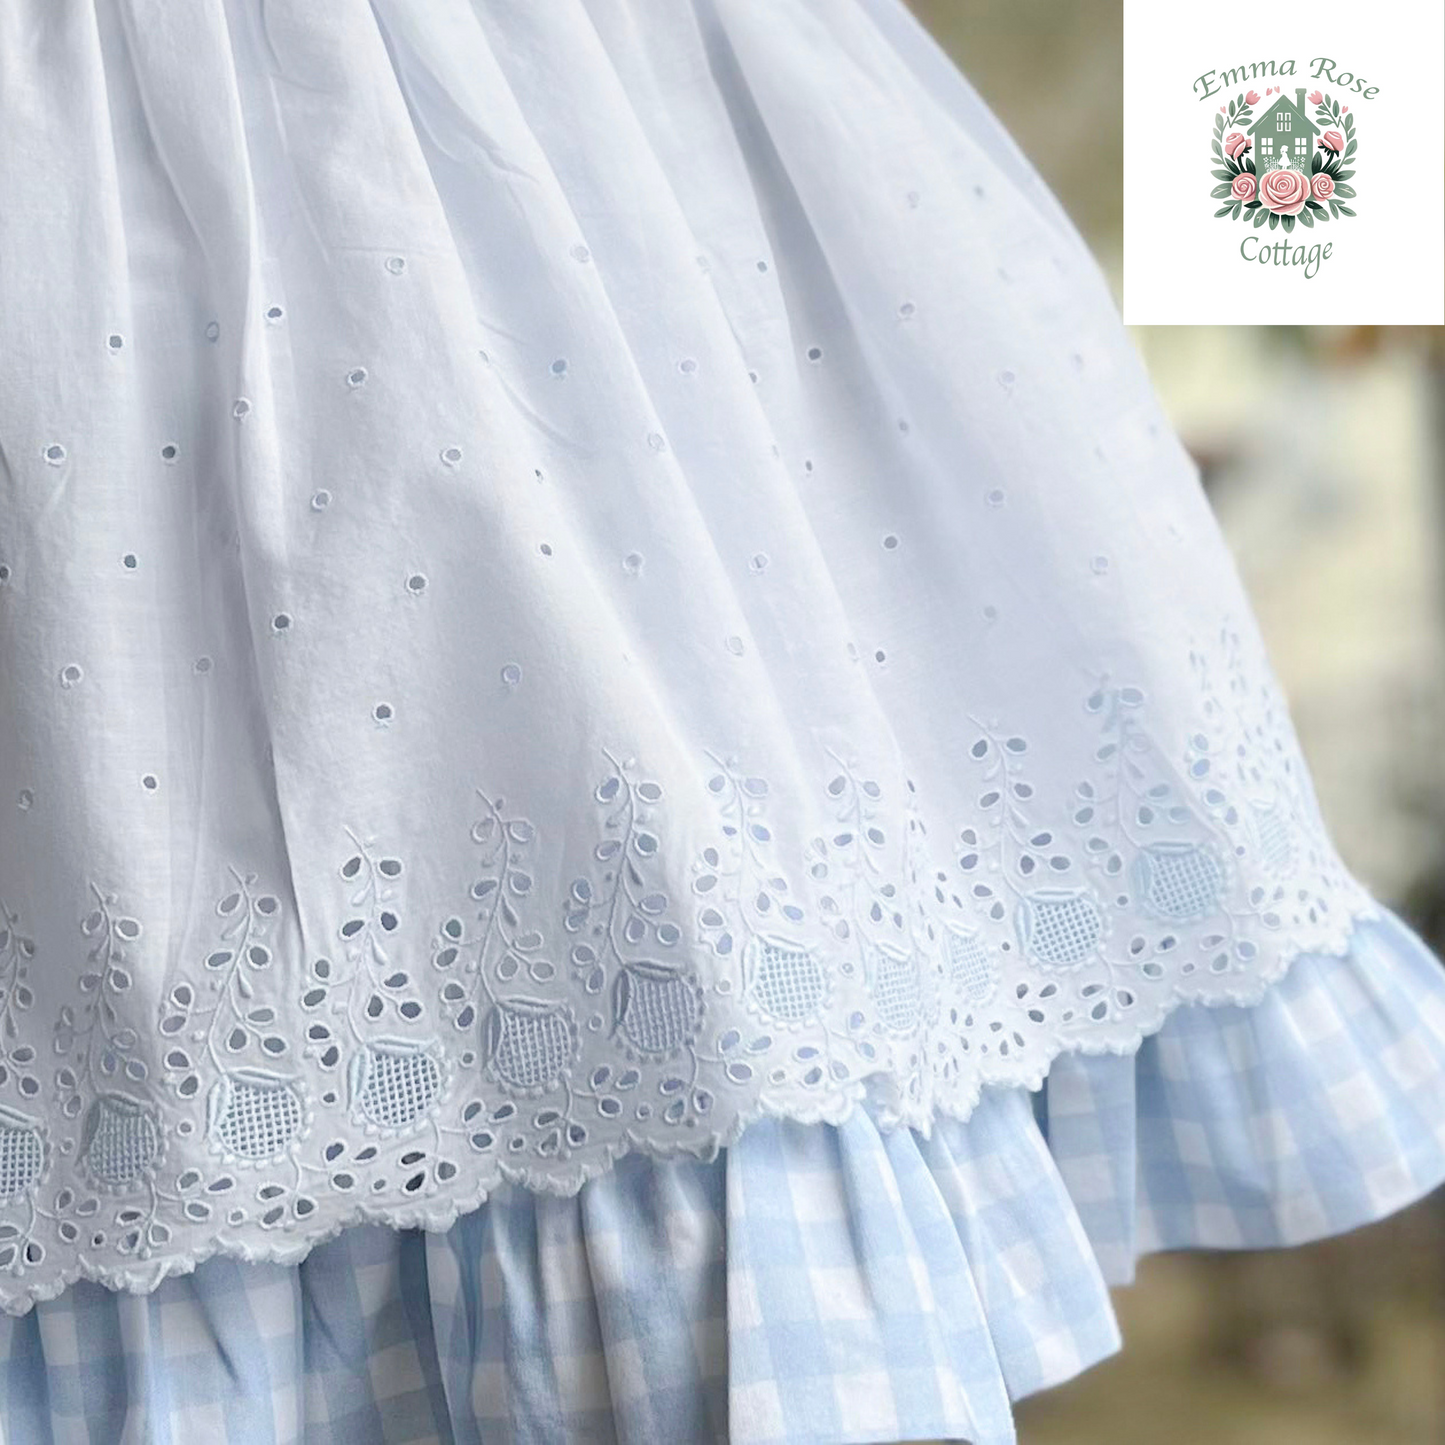 Vintage Elegance - Size 3T - beautiful blue gingham with embroidered overskirt and vintage lace